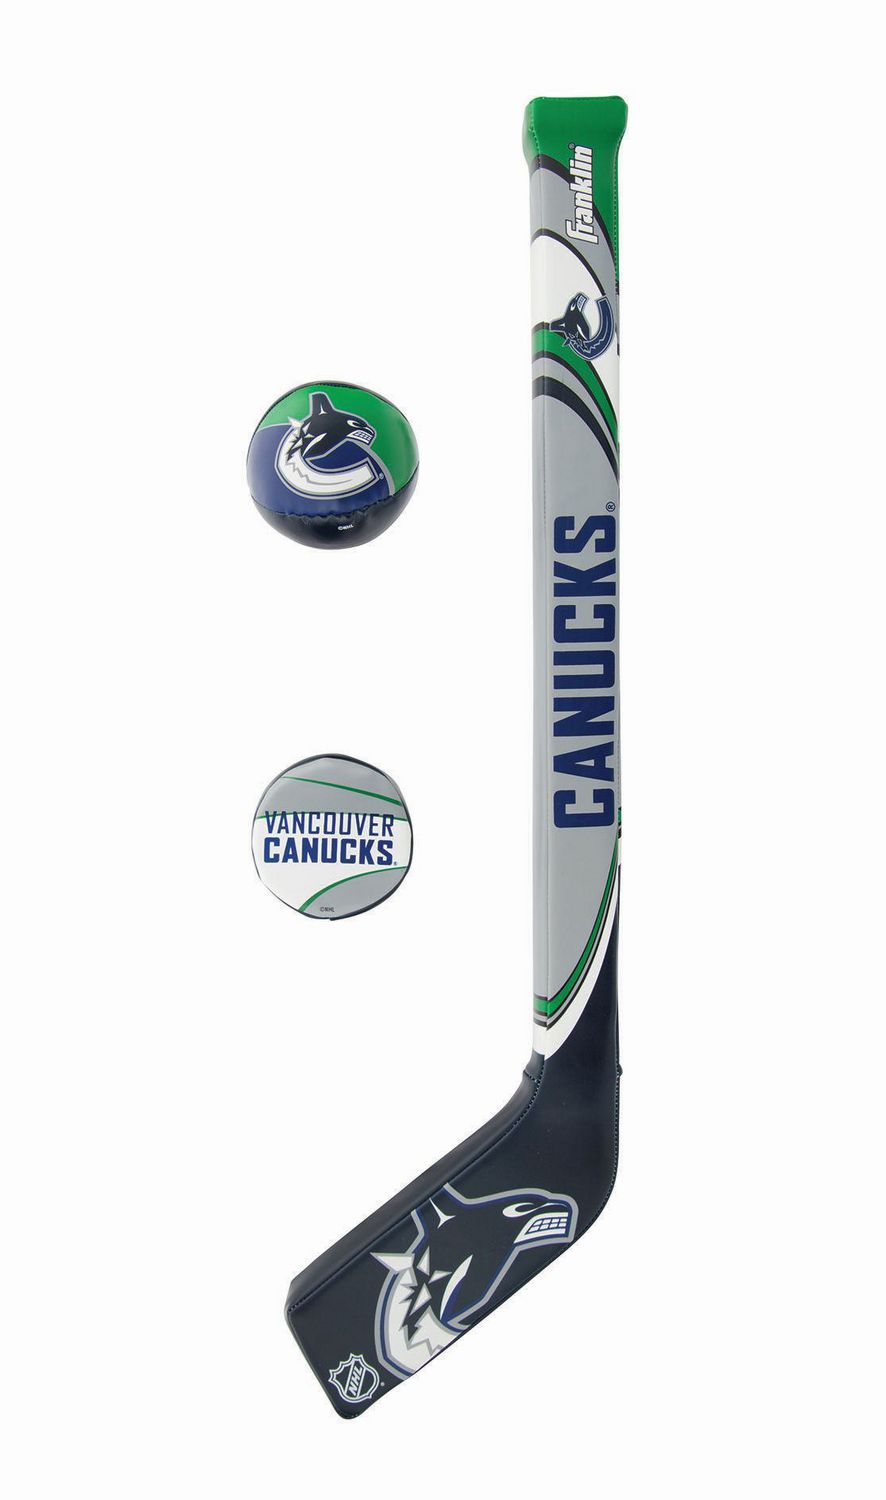 VANCOUVER CANUCKS MINI MASK PUCK & WOOD HOCKEY STICK 5.5 TALL NEW NHL  LICENSED